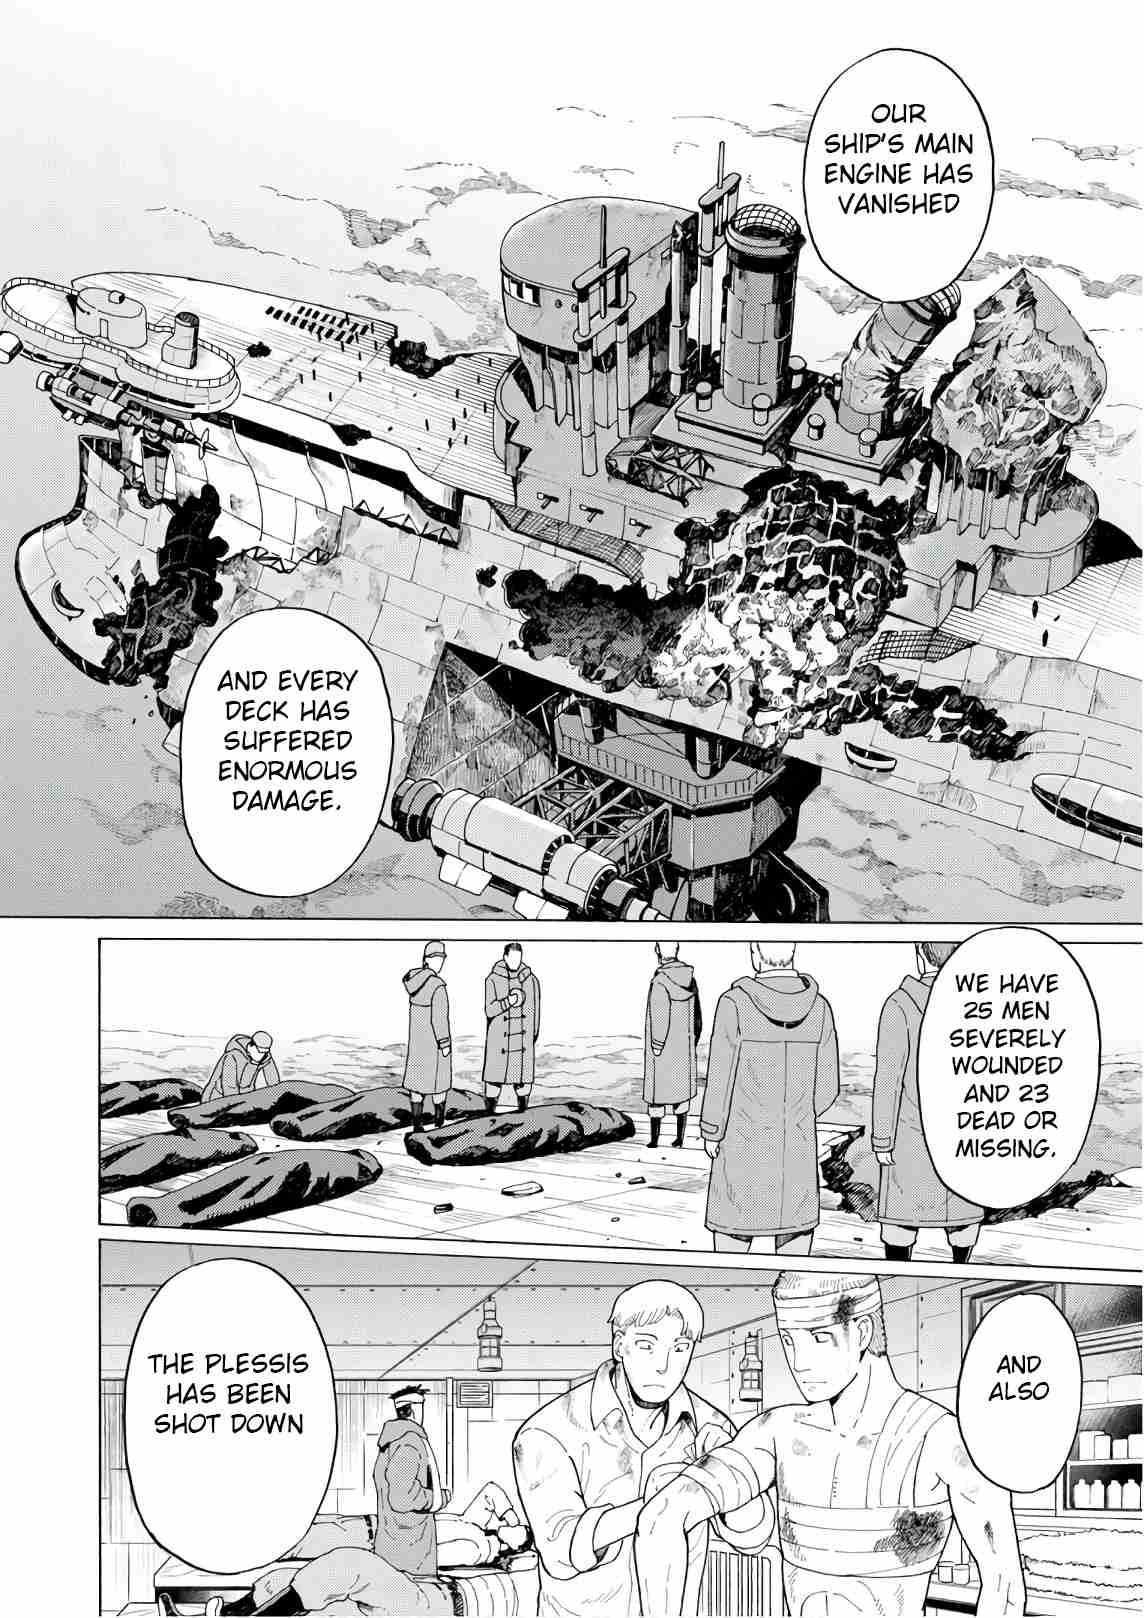 Asebi and Adventurers of Sky World Vol. 9 Ch. 52 Discouragement and courage